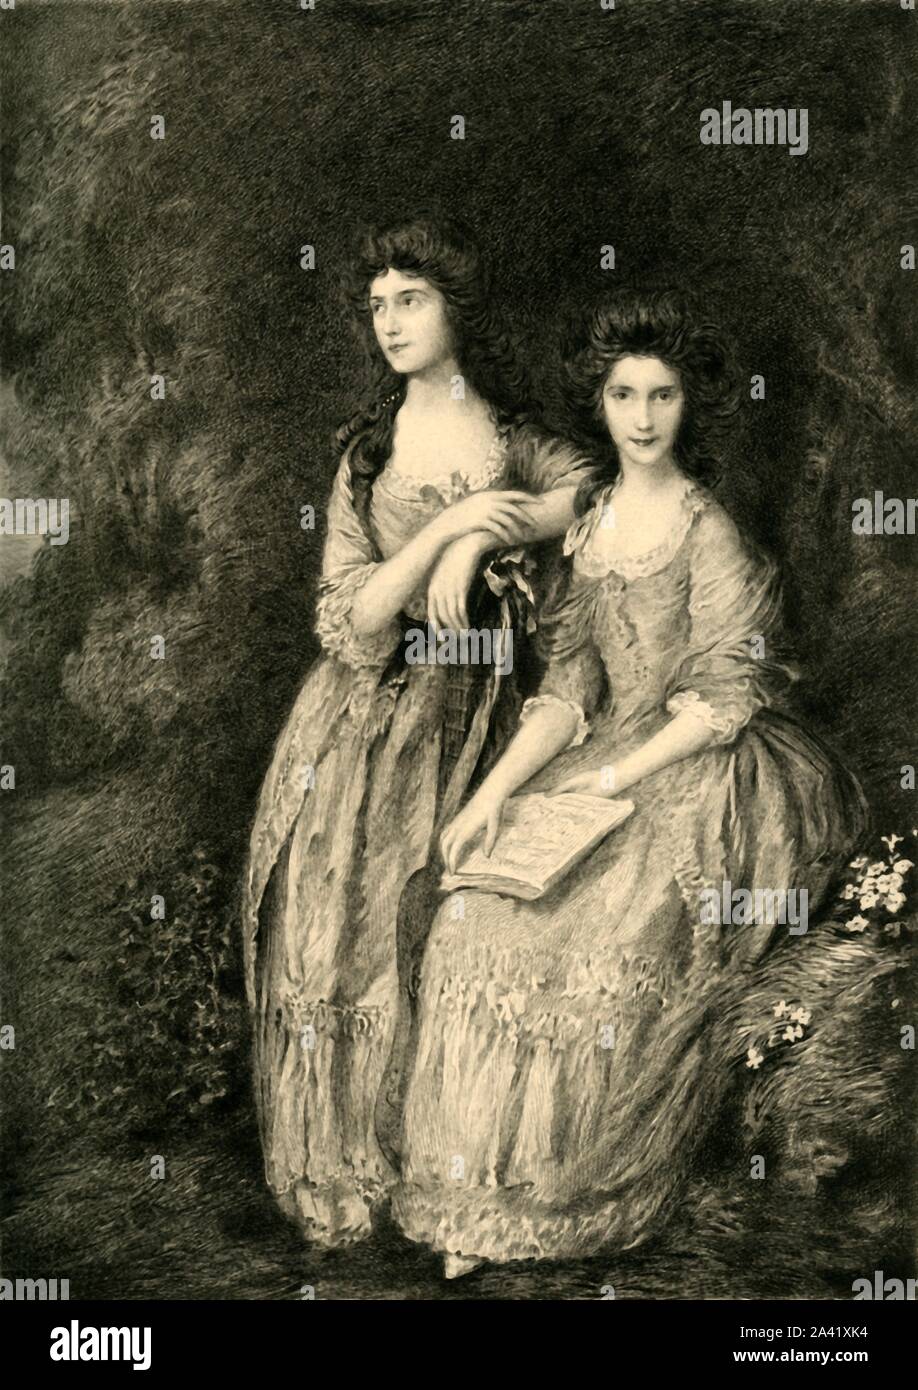 'Mrs. Sheridan and Mrs. Tickell', c1772, (1908). Portrait of the Linley sisters, Elizabeth Ann Sheridan (1754-1792) and Mary Linley (1758-1787), daughters of the composer Thomas Linley. Elizabeth was one of the most noted soprano singers of her day. Mary sang publicly until she married the playwright Richard Tickell in 1780. Engraving by Henry Cheffer after 'Elizabeth and Mary Linley', also known as 'The Linley Sisters, afterwards Mrs. Tickell and Mrs. Sheridan', painting in the Dulwich Picture Gallery, London. From &quot;La Revue De L'Art - Ancien et Moderne&quot; - Volume XXIV, July-December Stock Photo